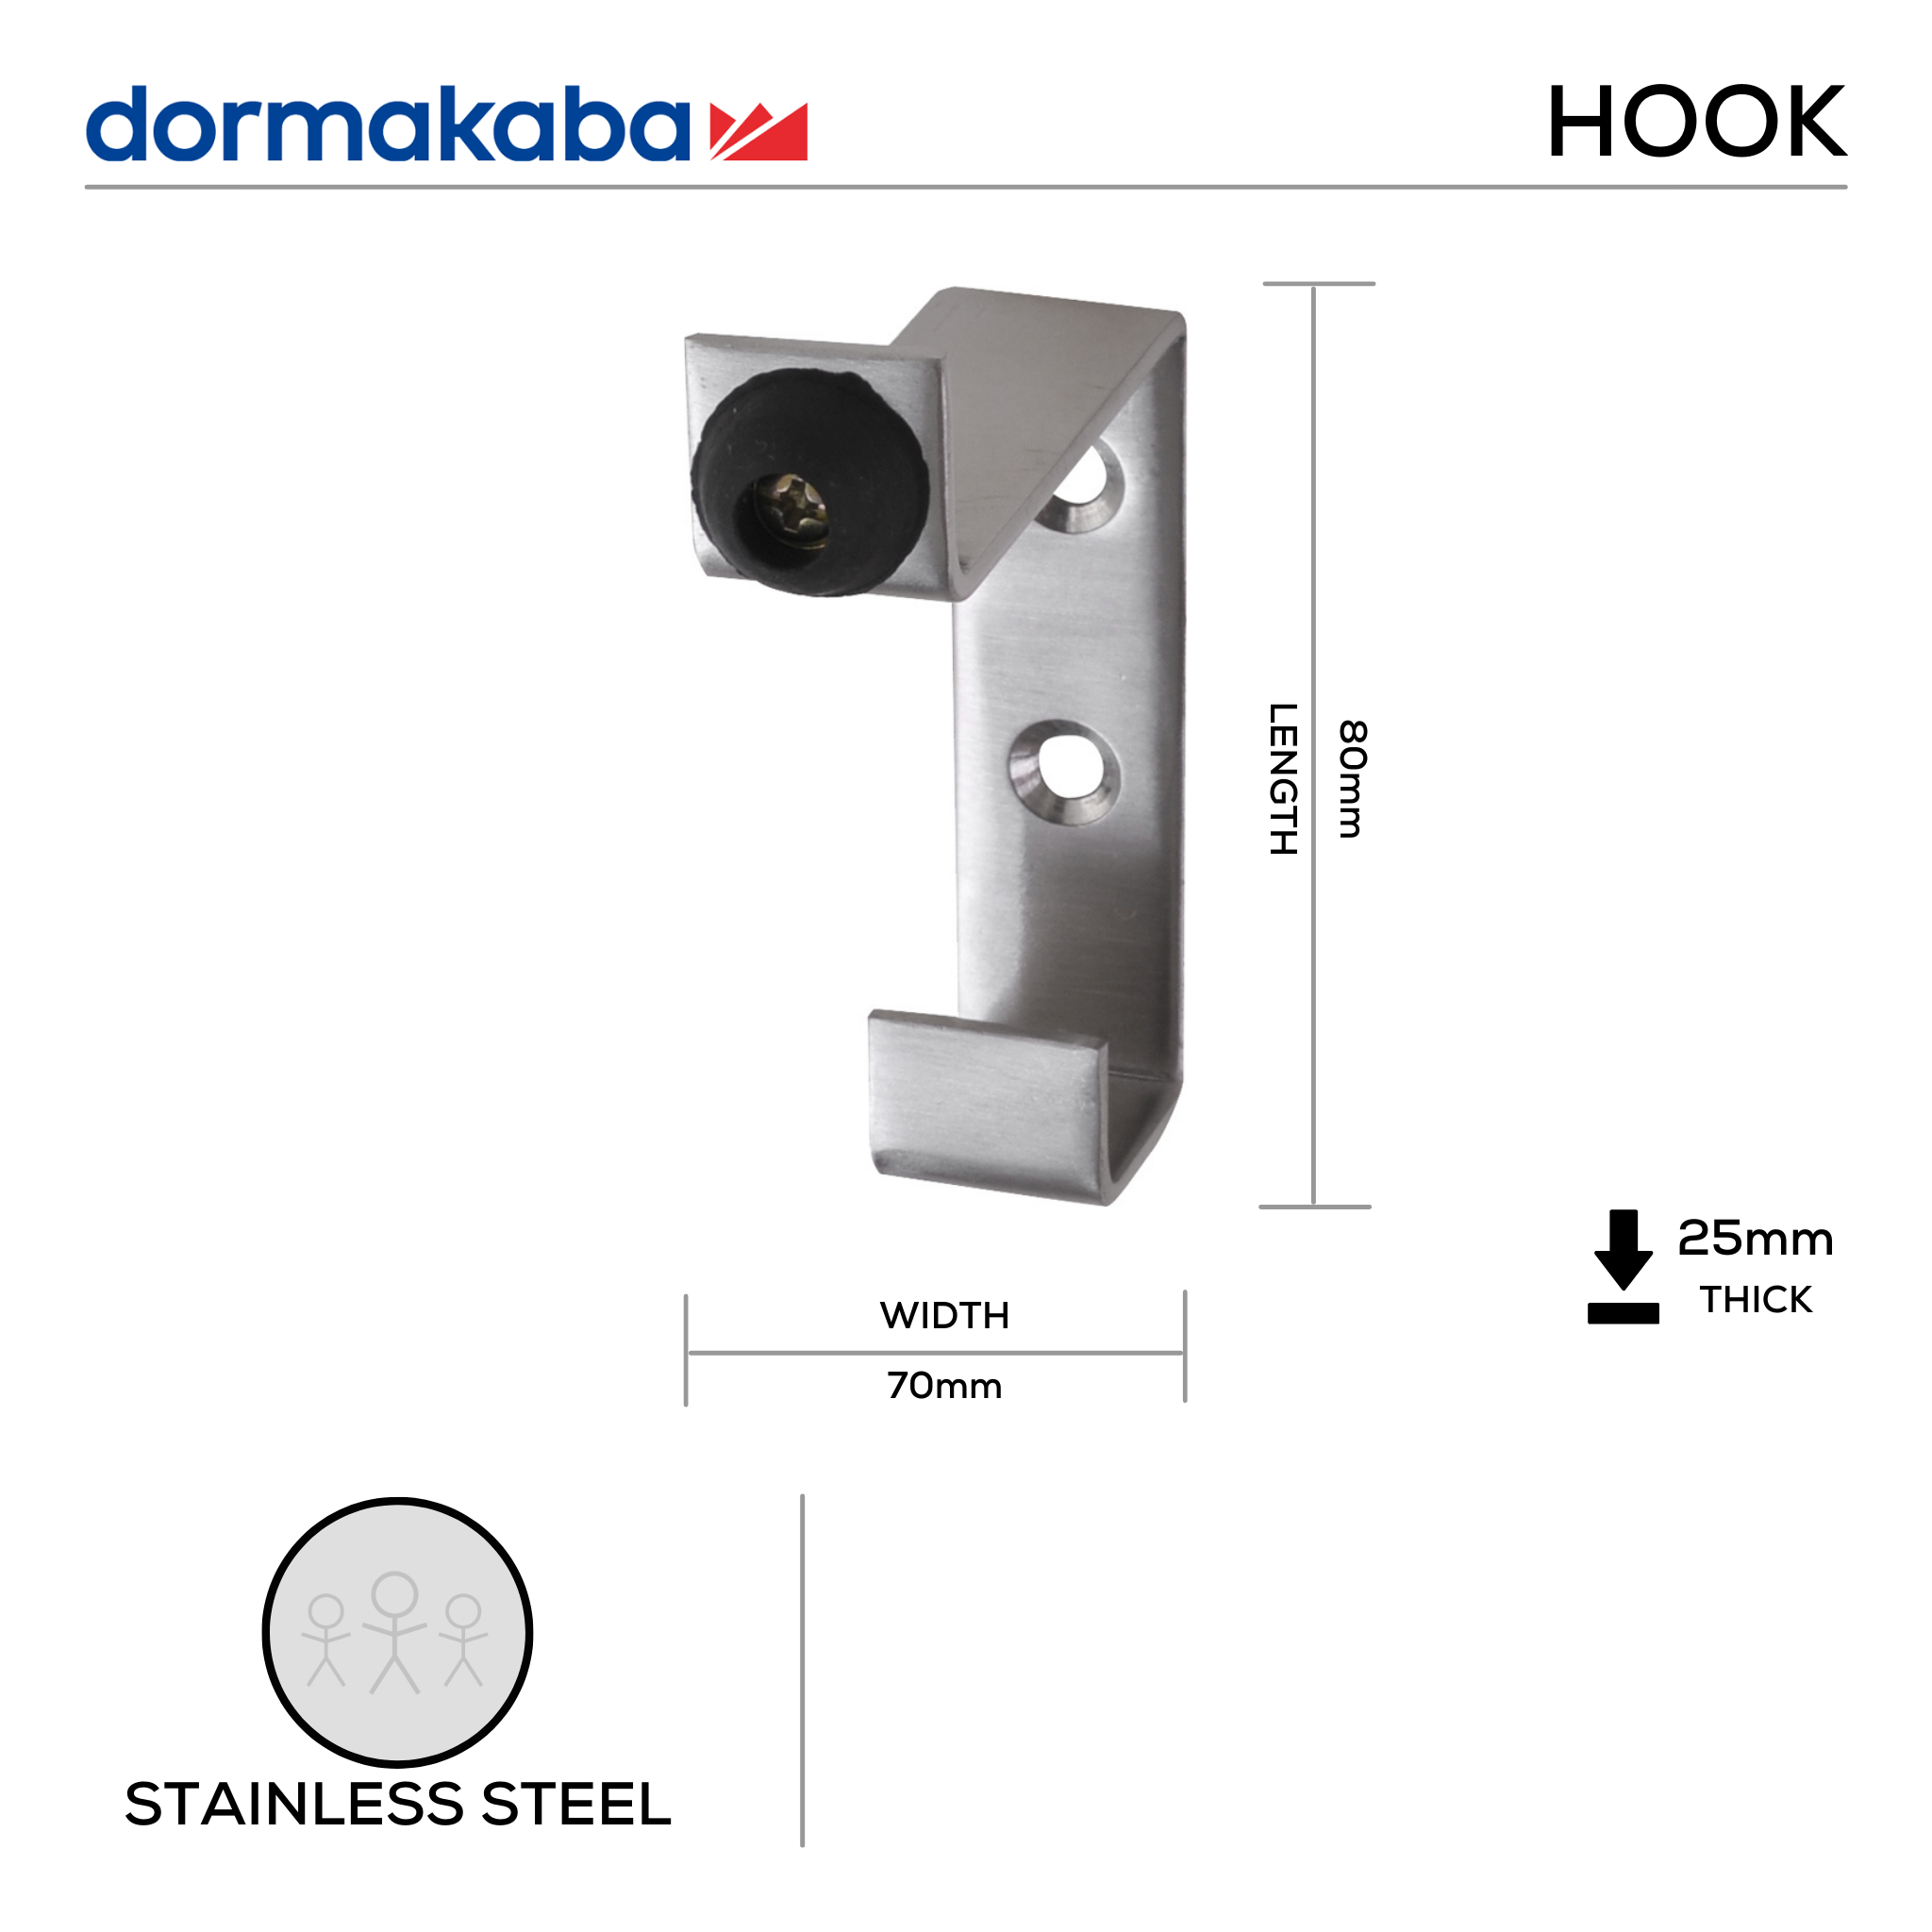 DHC-SS-031-B, Hat & Coat Hook with Rubber Buffer, 80mm (l) x 70mm (w) x 25mm (t), Stainless Steel, DORMAKABA